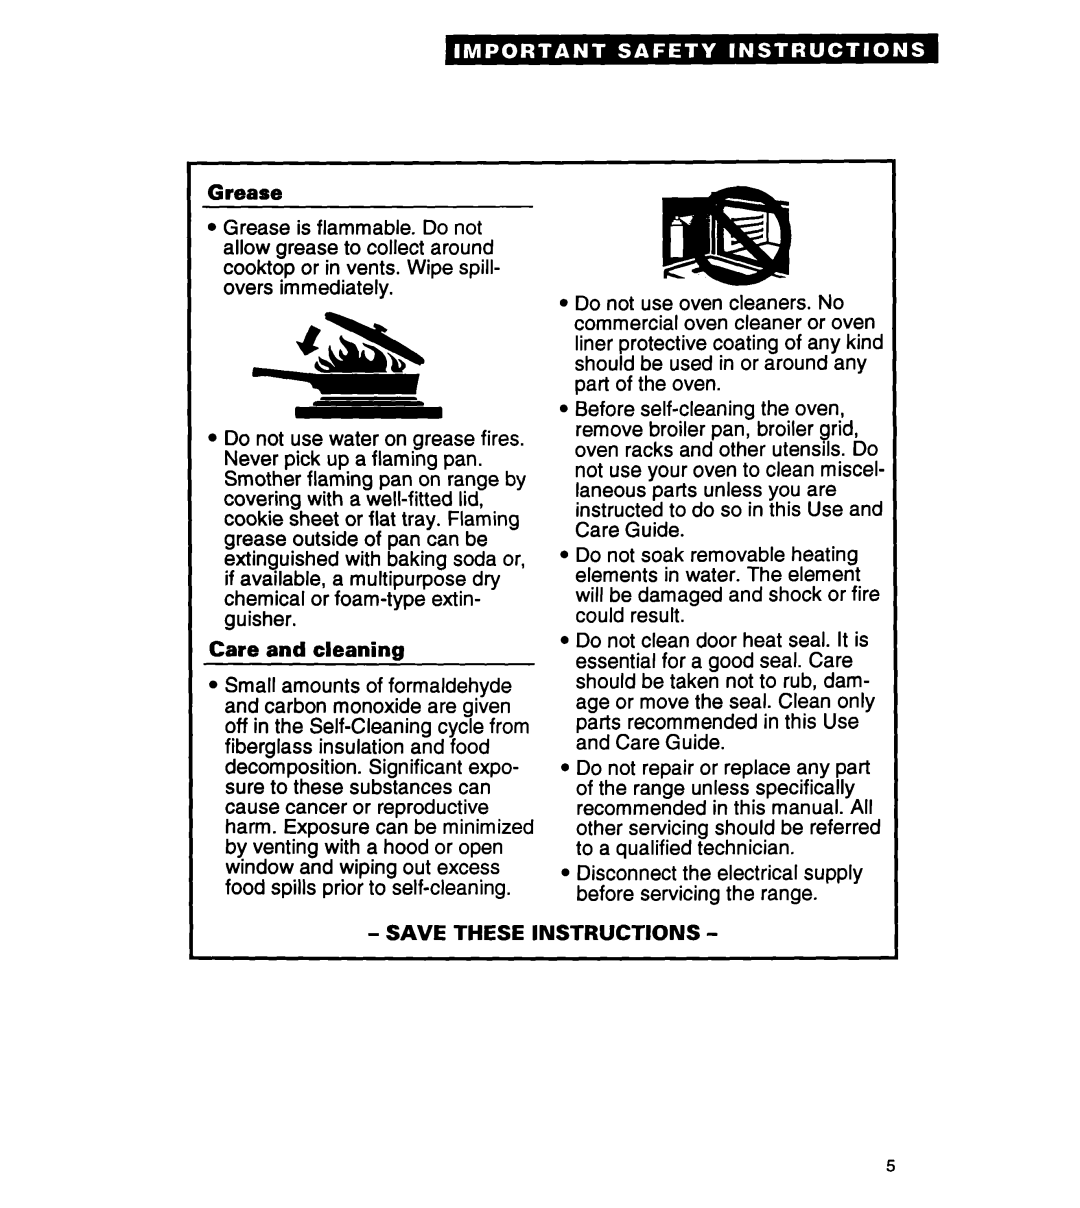 Whirlpool RS363PXY manual Grease, Care and cleaning, Save These Instructions 